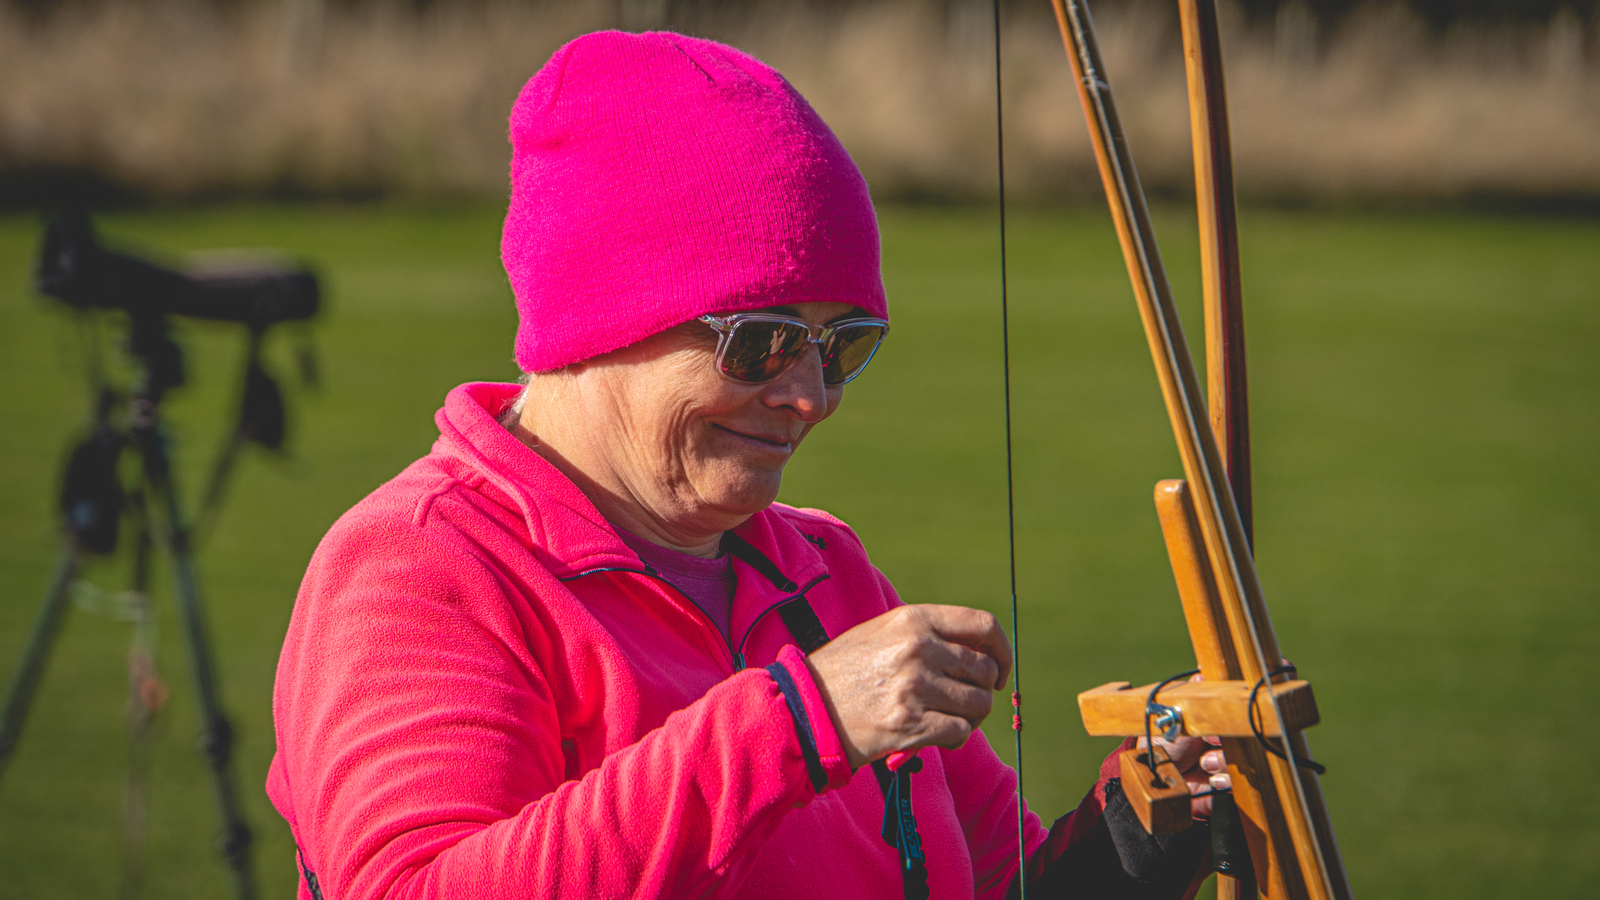 Female archer at a clout shoot